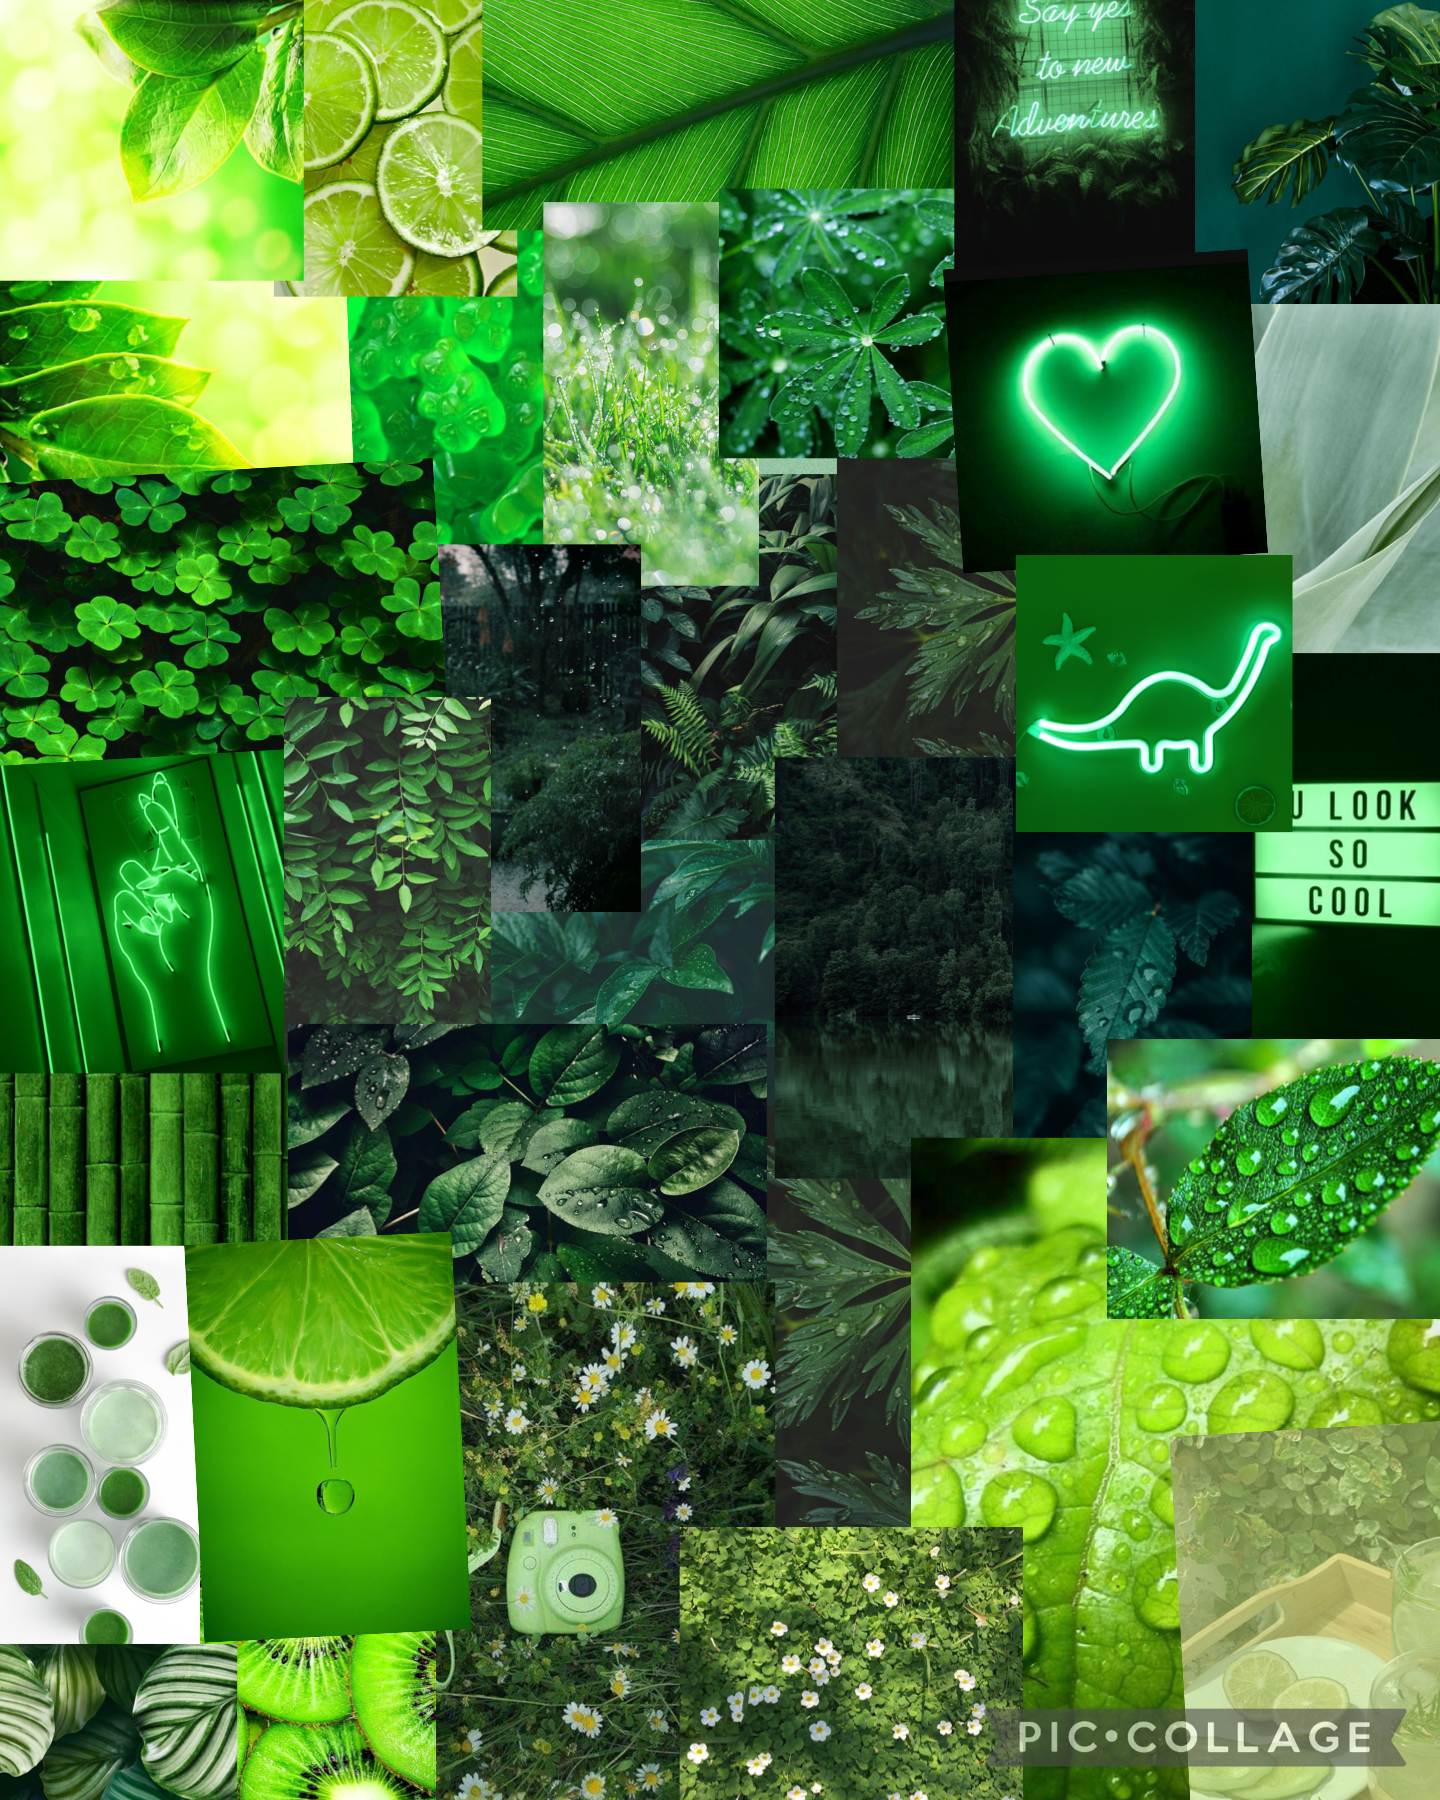 Tap me!!
Sorry I haven’t been posting in a while…… I did another green collage cuz why not and also cuz I wanted to do a darker more casual green that’s like nature type (a bit). It’s not the best, but hope you enjoy!